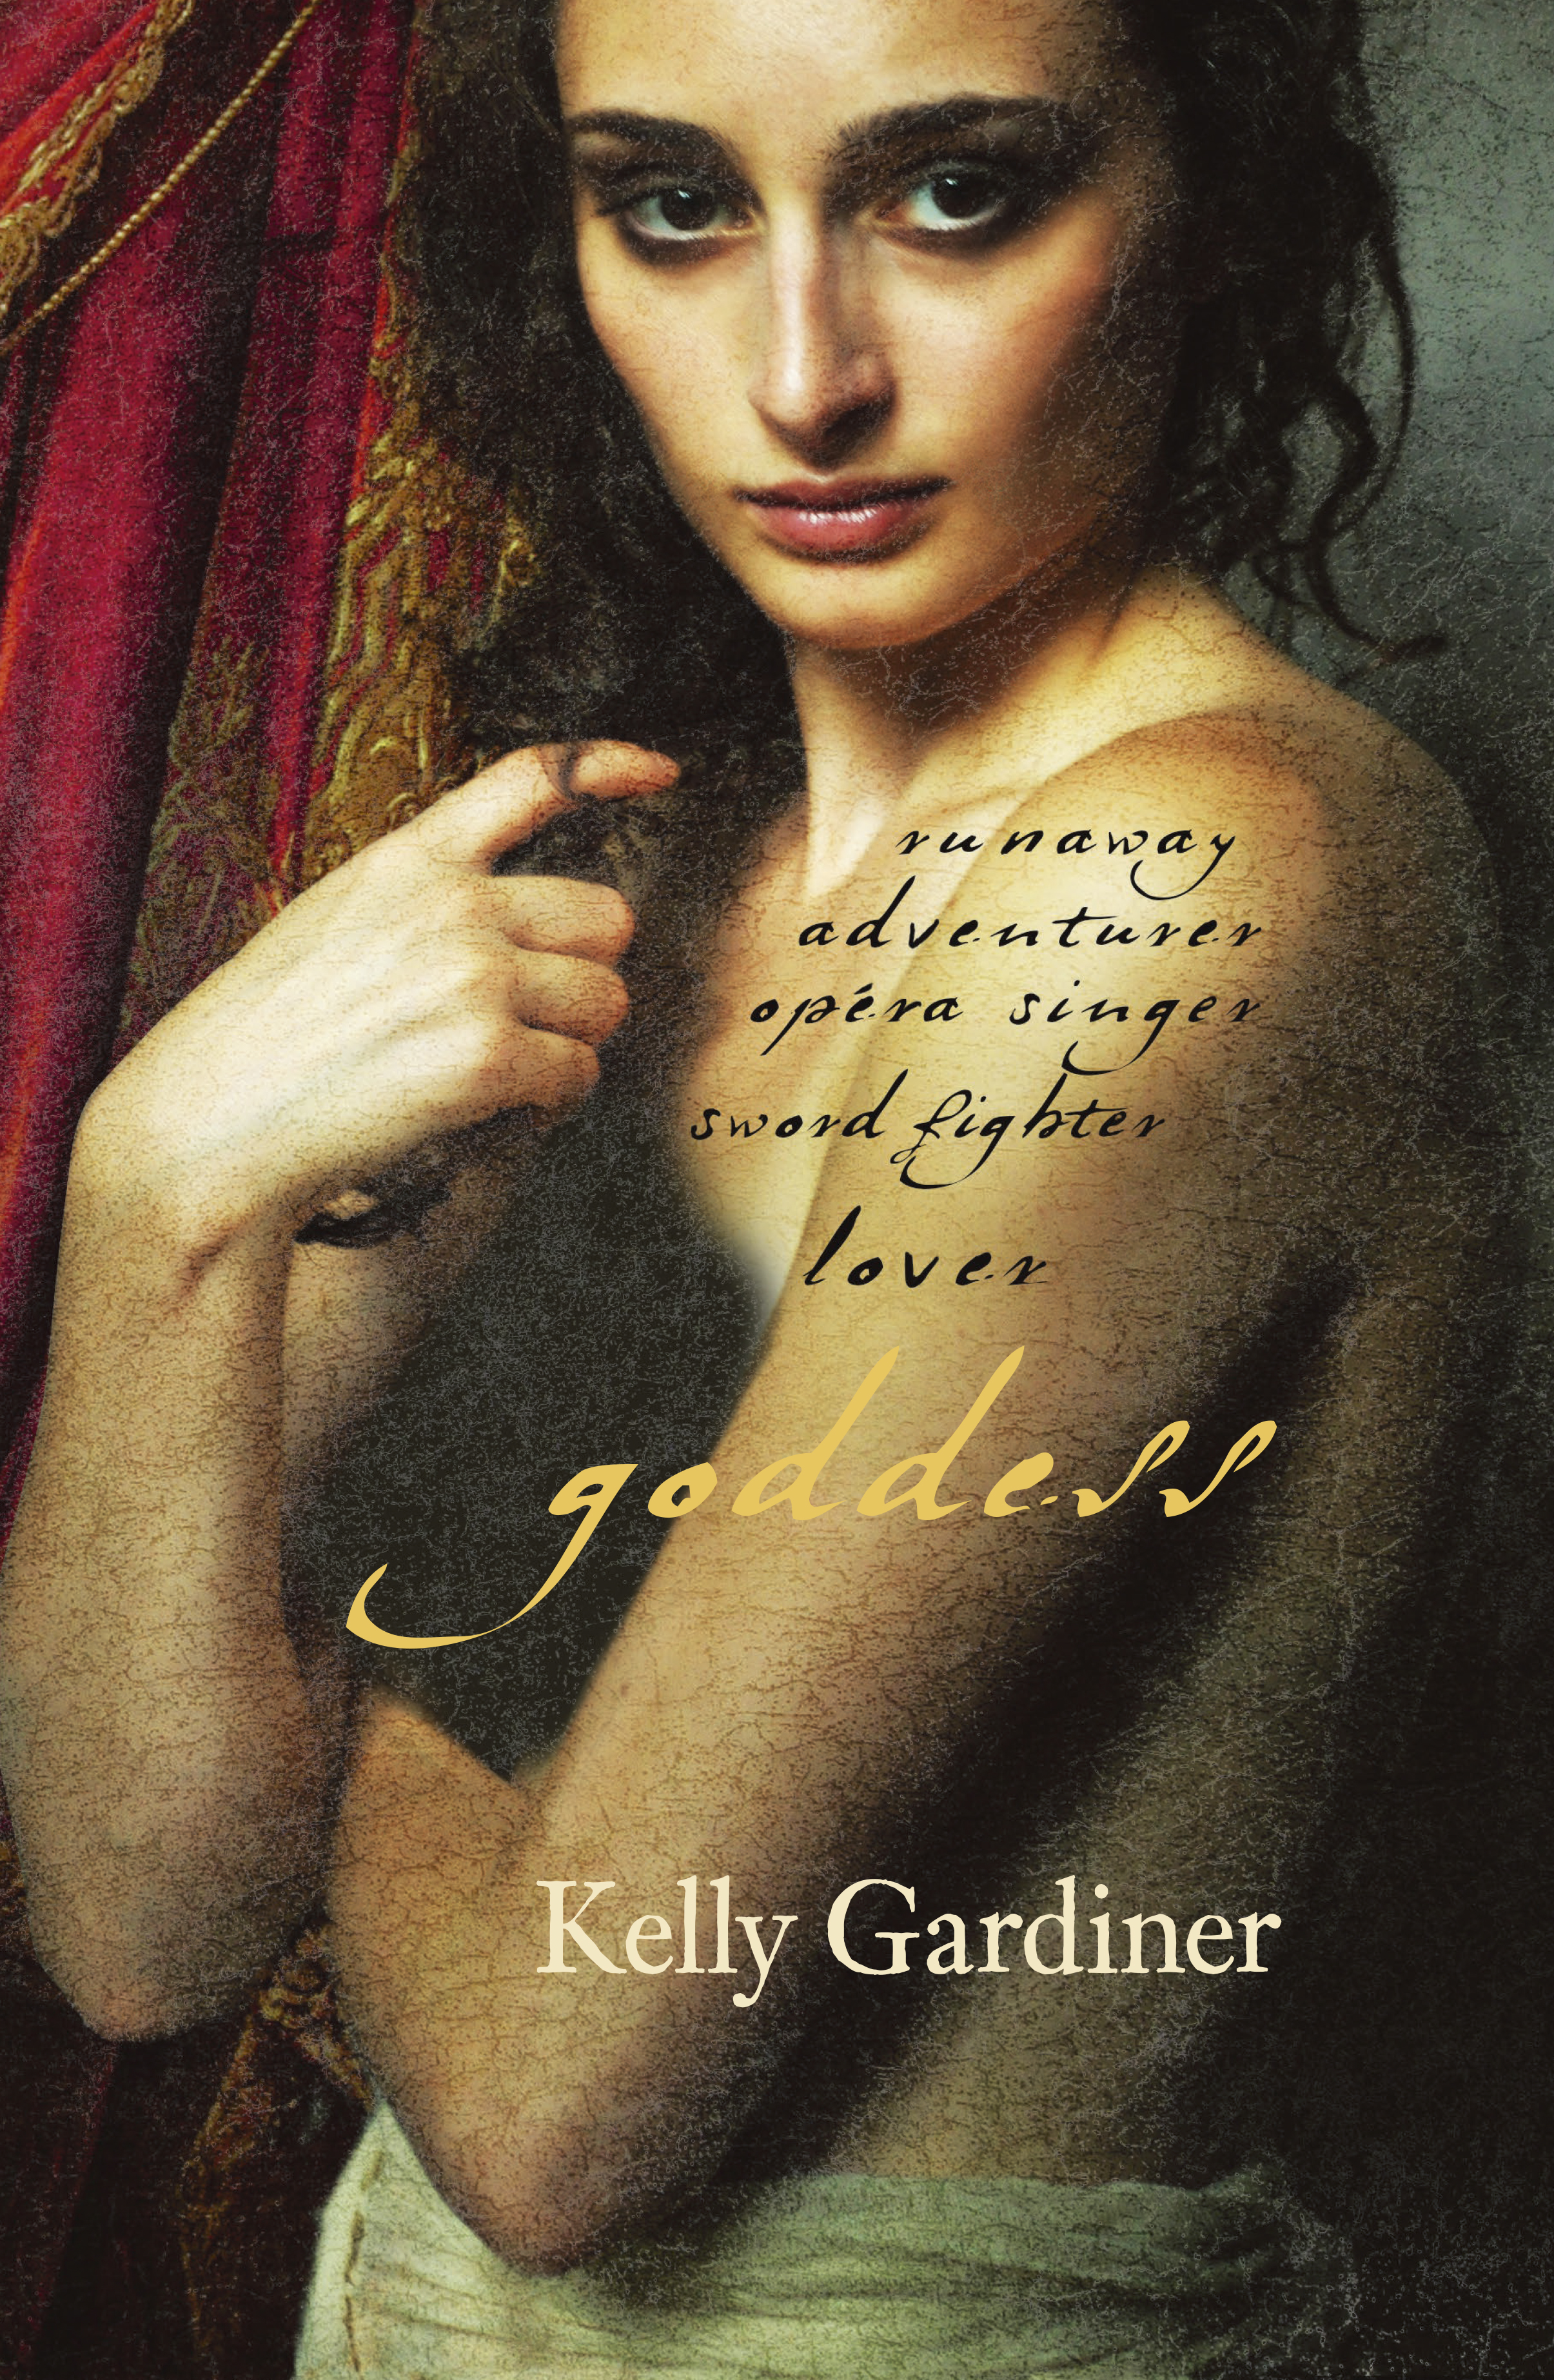 Image of front cover of Goddess